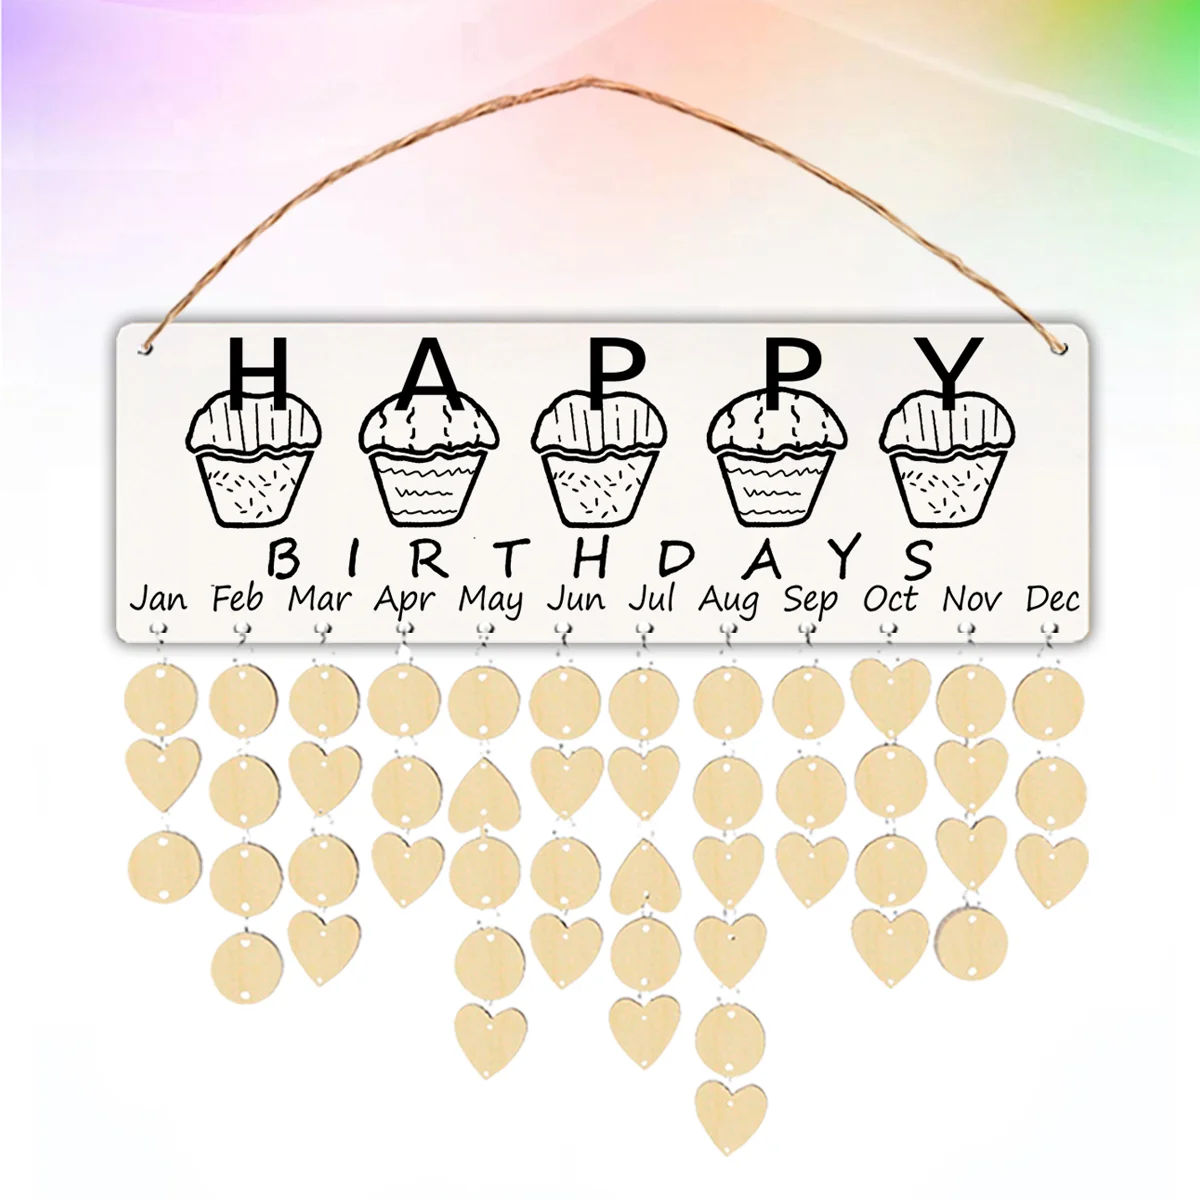 Wooden Birthday Reminder Board DIY Dates Reminder Sign Rope Hanging Events Anniversary Celebration Calendar Wall Plaque with advertising board clip hard and soft tooth co extrusion clamp supermarket sign sucker label holder with suction cup